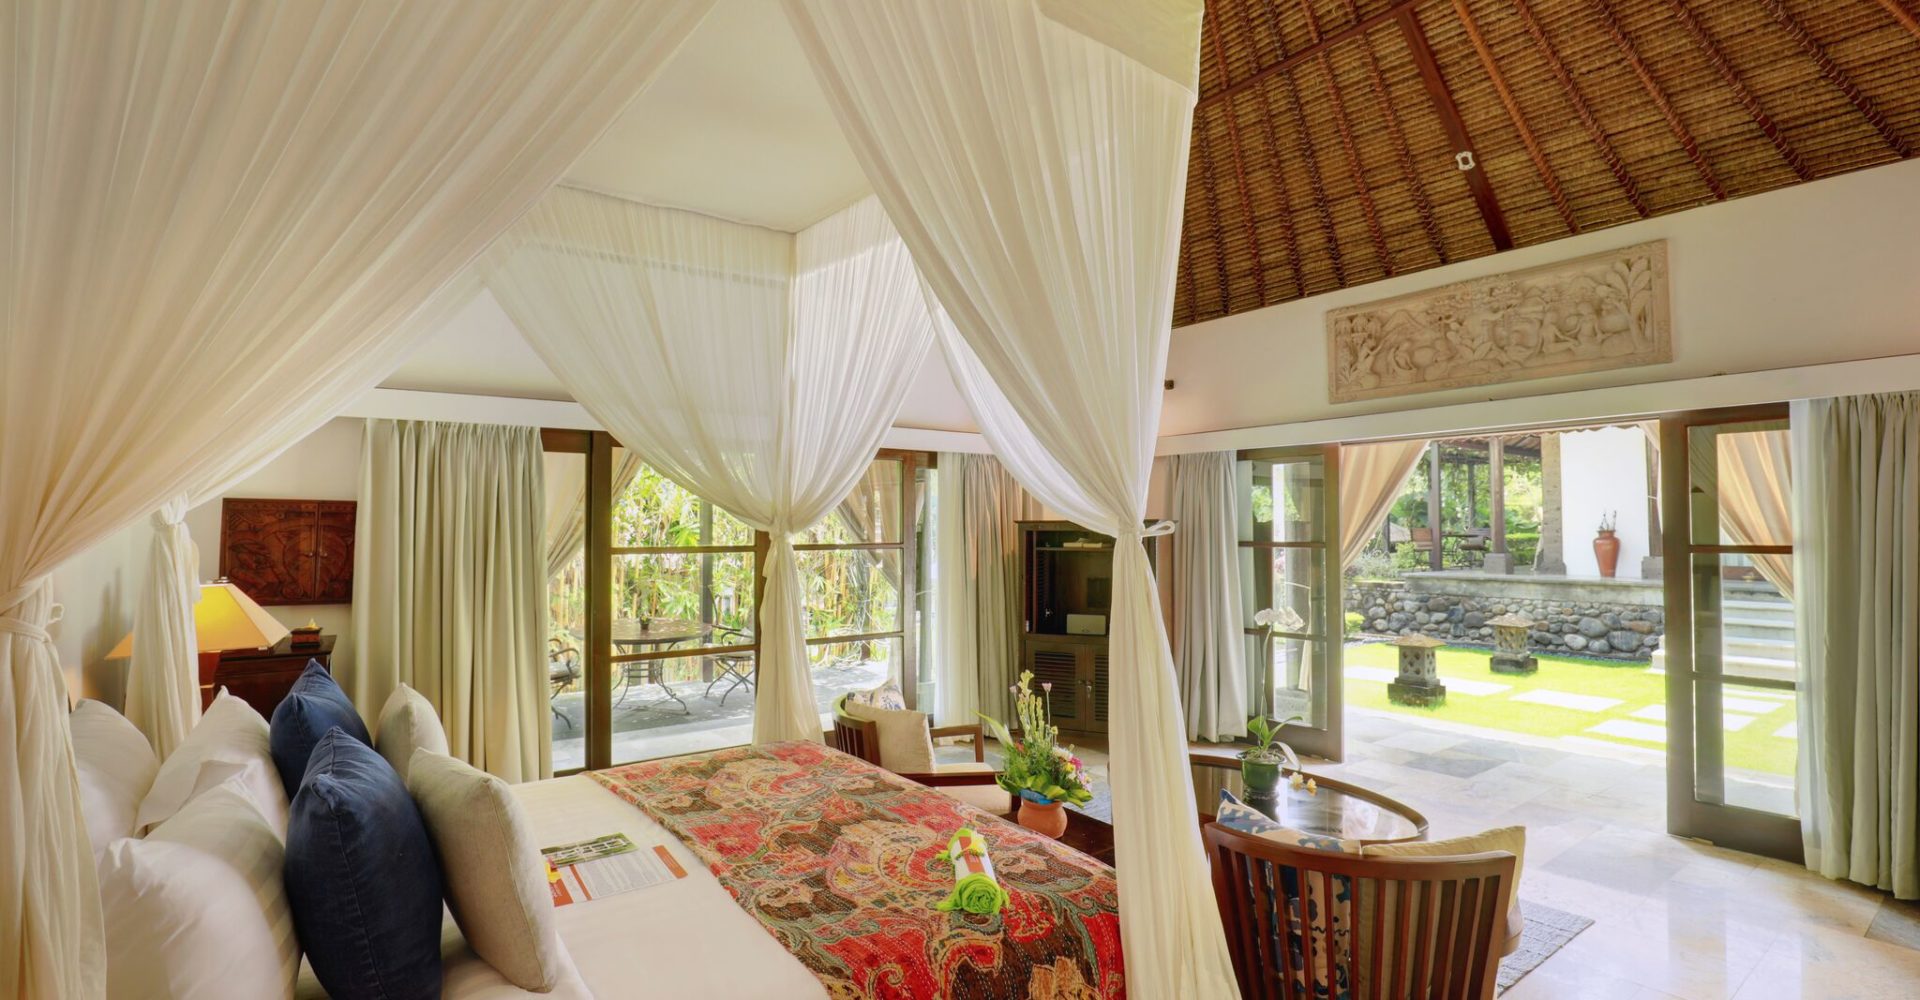 The inside Sukavati's one bedroom luxury villa ‘Samanthabha' with large bed and seating area.